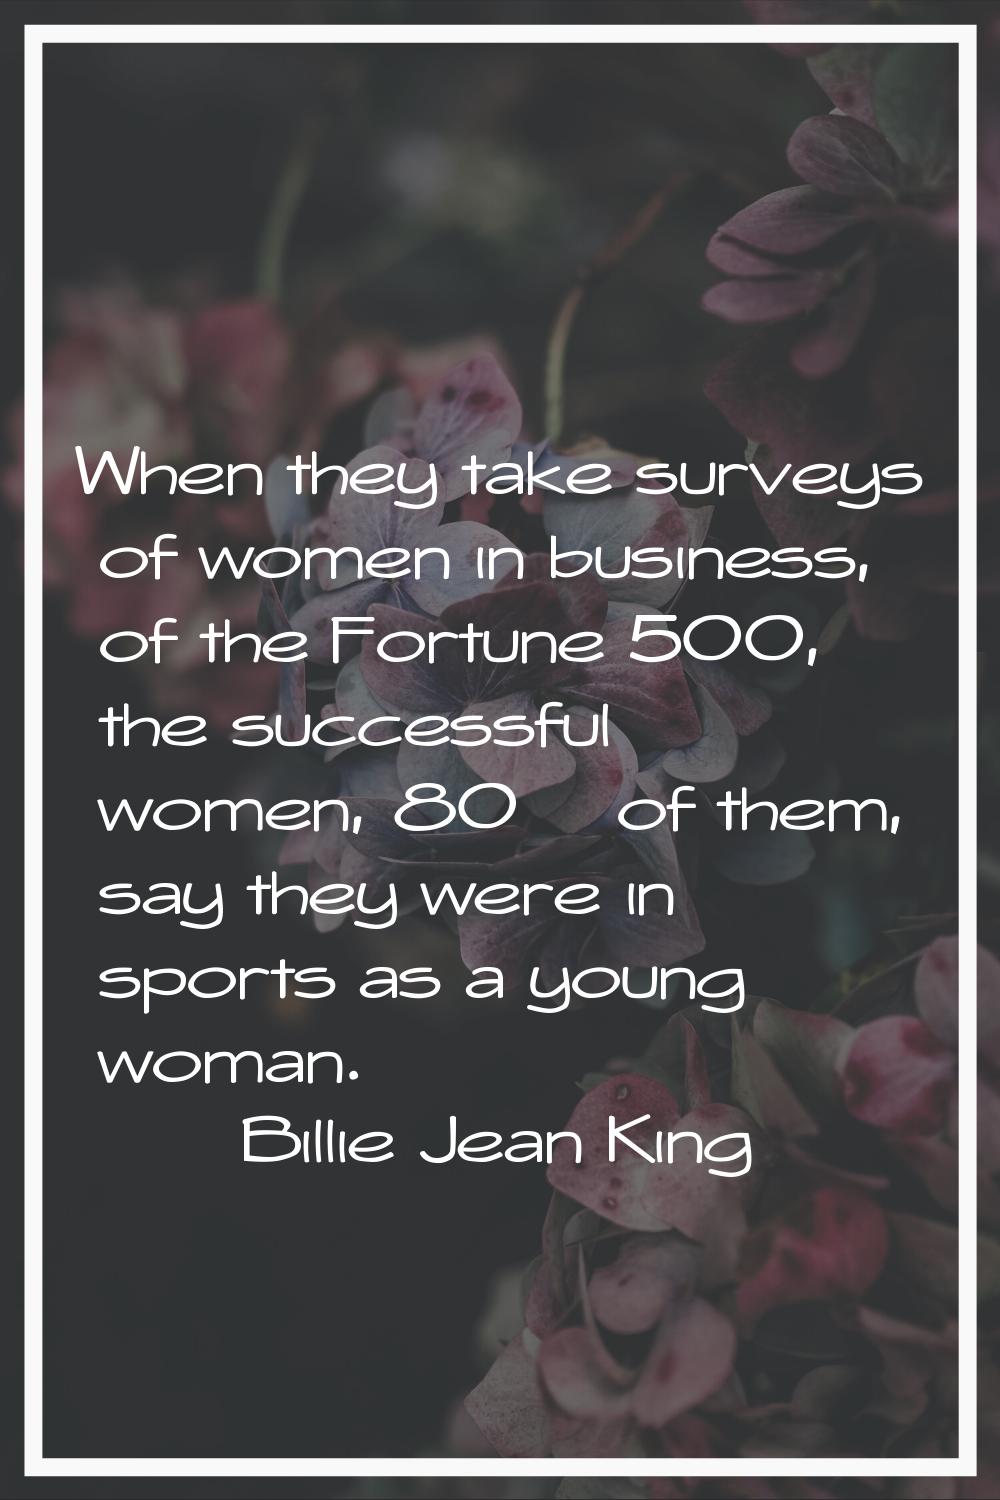 When they take surveys of women in business, of the Fortune 500, the successful women, 80% of them,